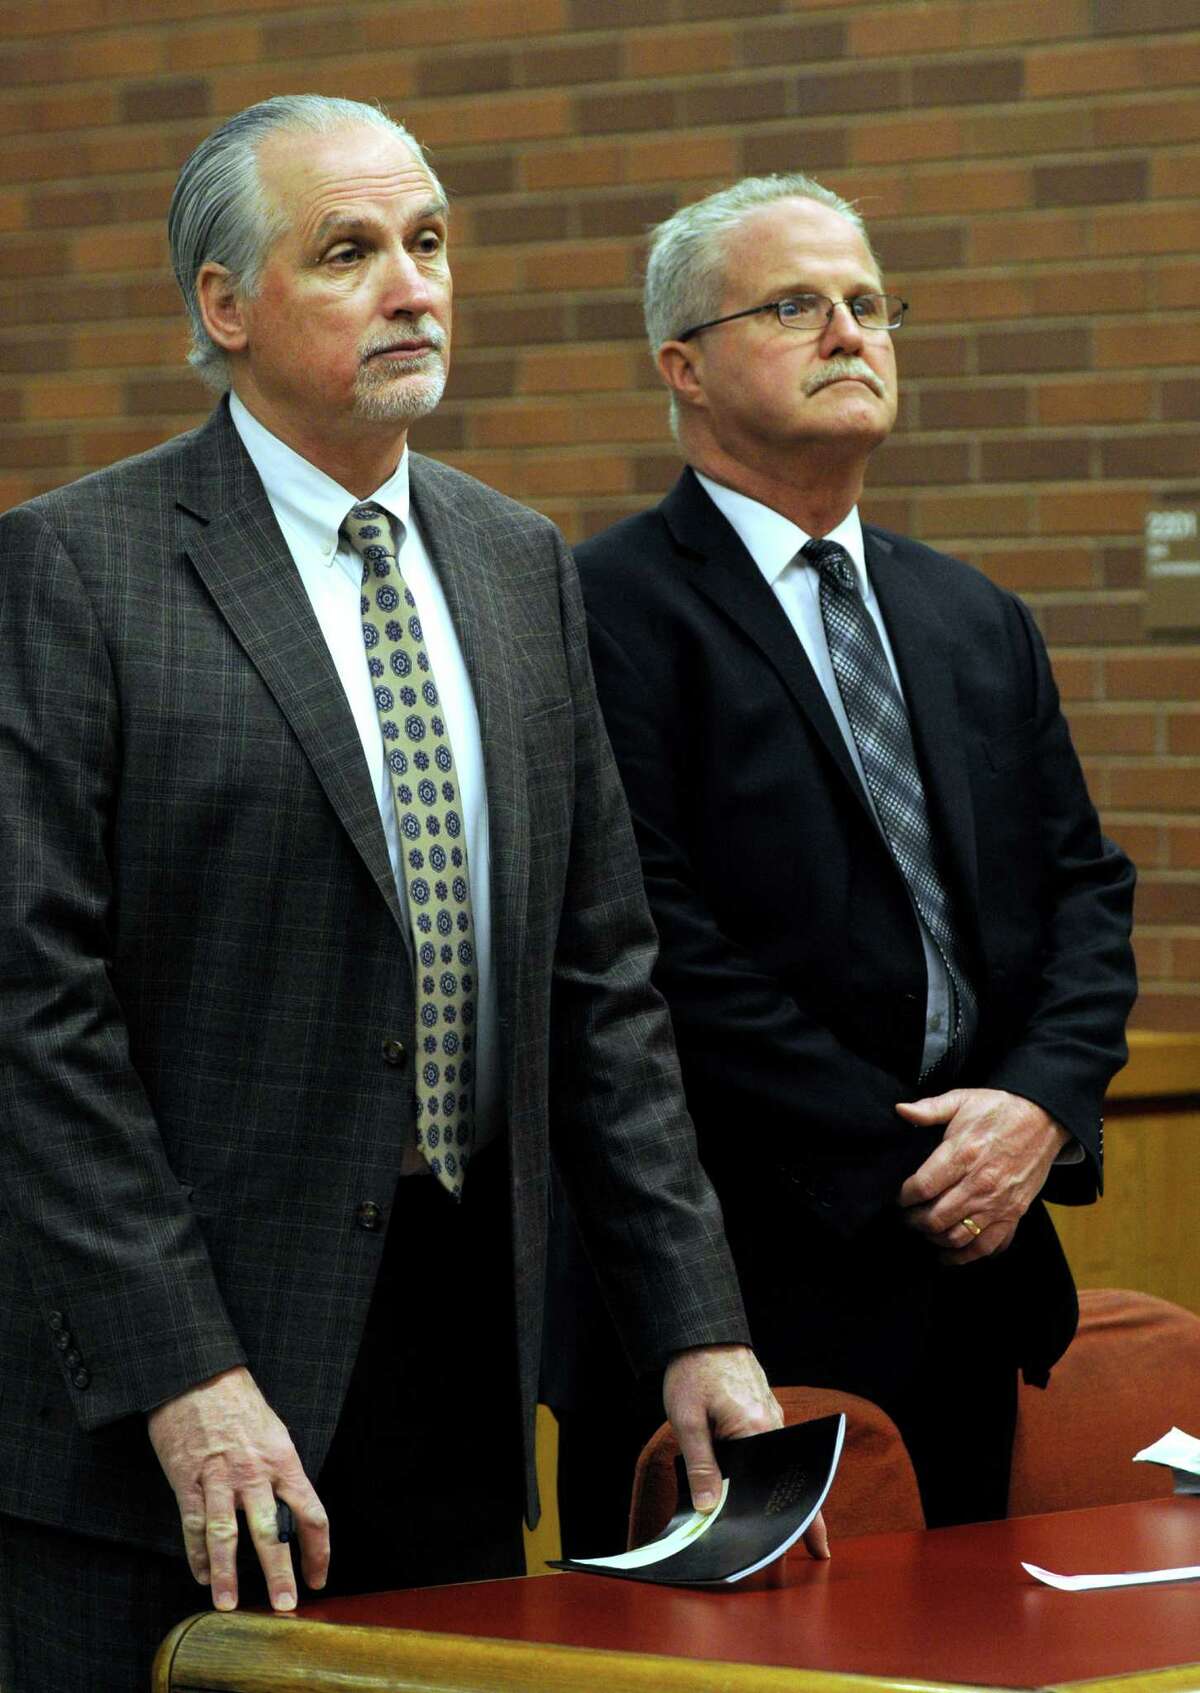 BrookfieldâÄôs former school finance director Art Colley, right, appears in Superior Court in Danbury, Conn., Wednesday morning, March 25, 2015, alongside his attorney, Eugene Riccio. Colley has been charged with second-degree larceny and third-degree forgery after police said he tried to claim reimbursement for three iPads he never purchased.